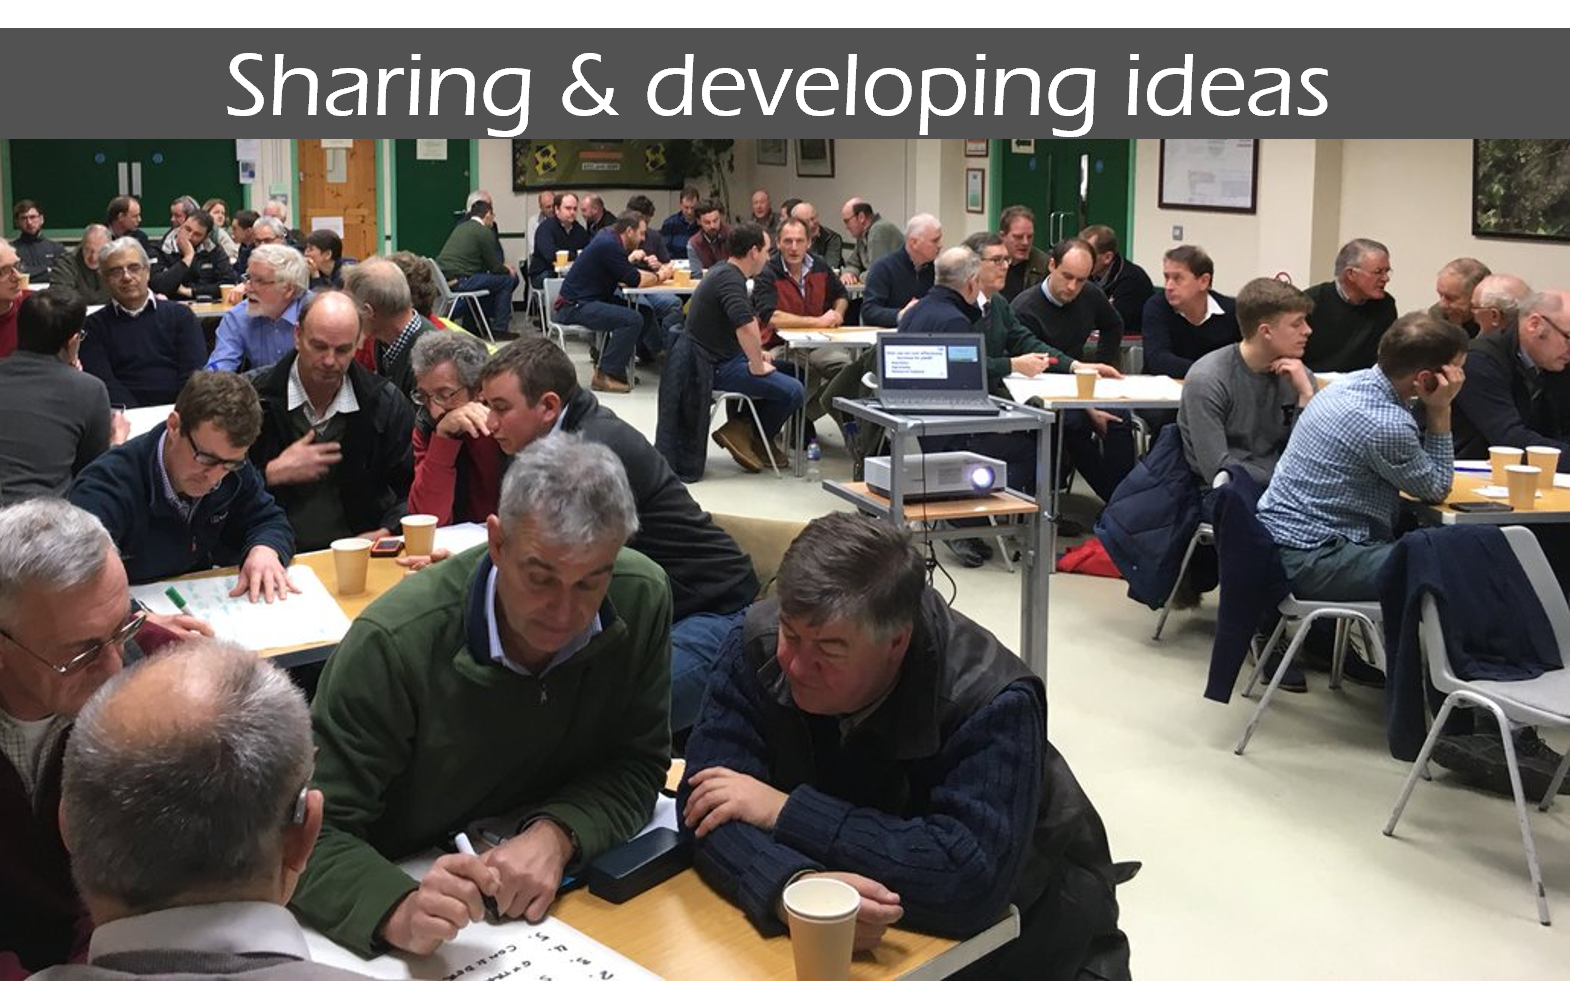 Farmers sharing and developing ideas